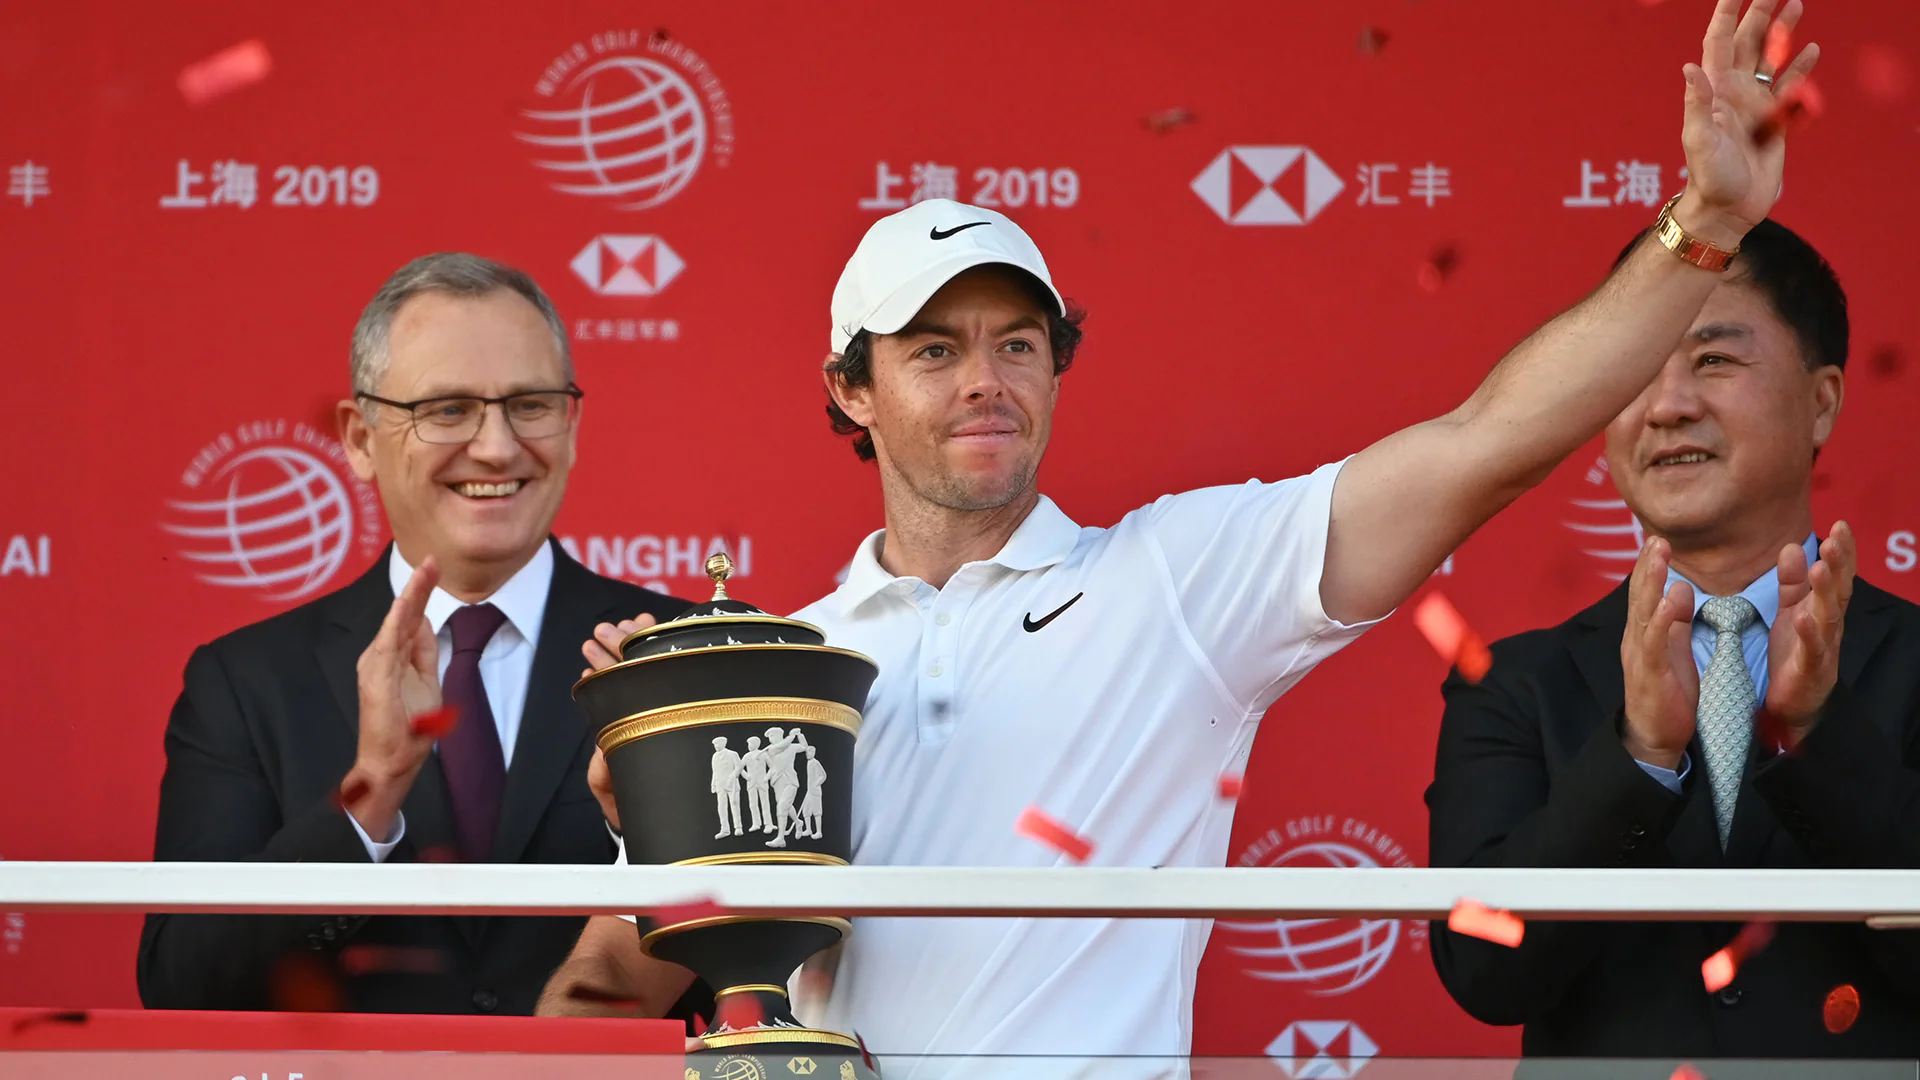 WGC-HSBC Champions Canceled for Third Consecutive Year